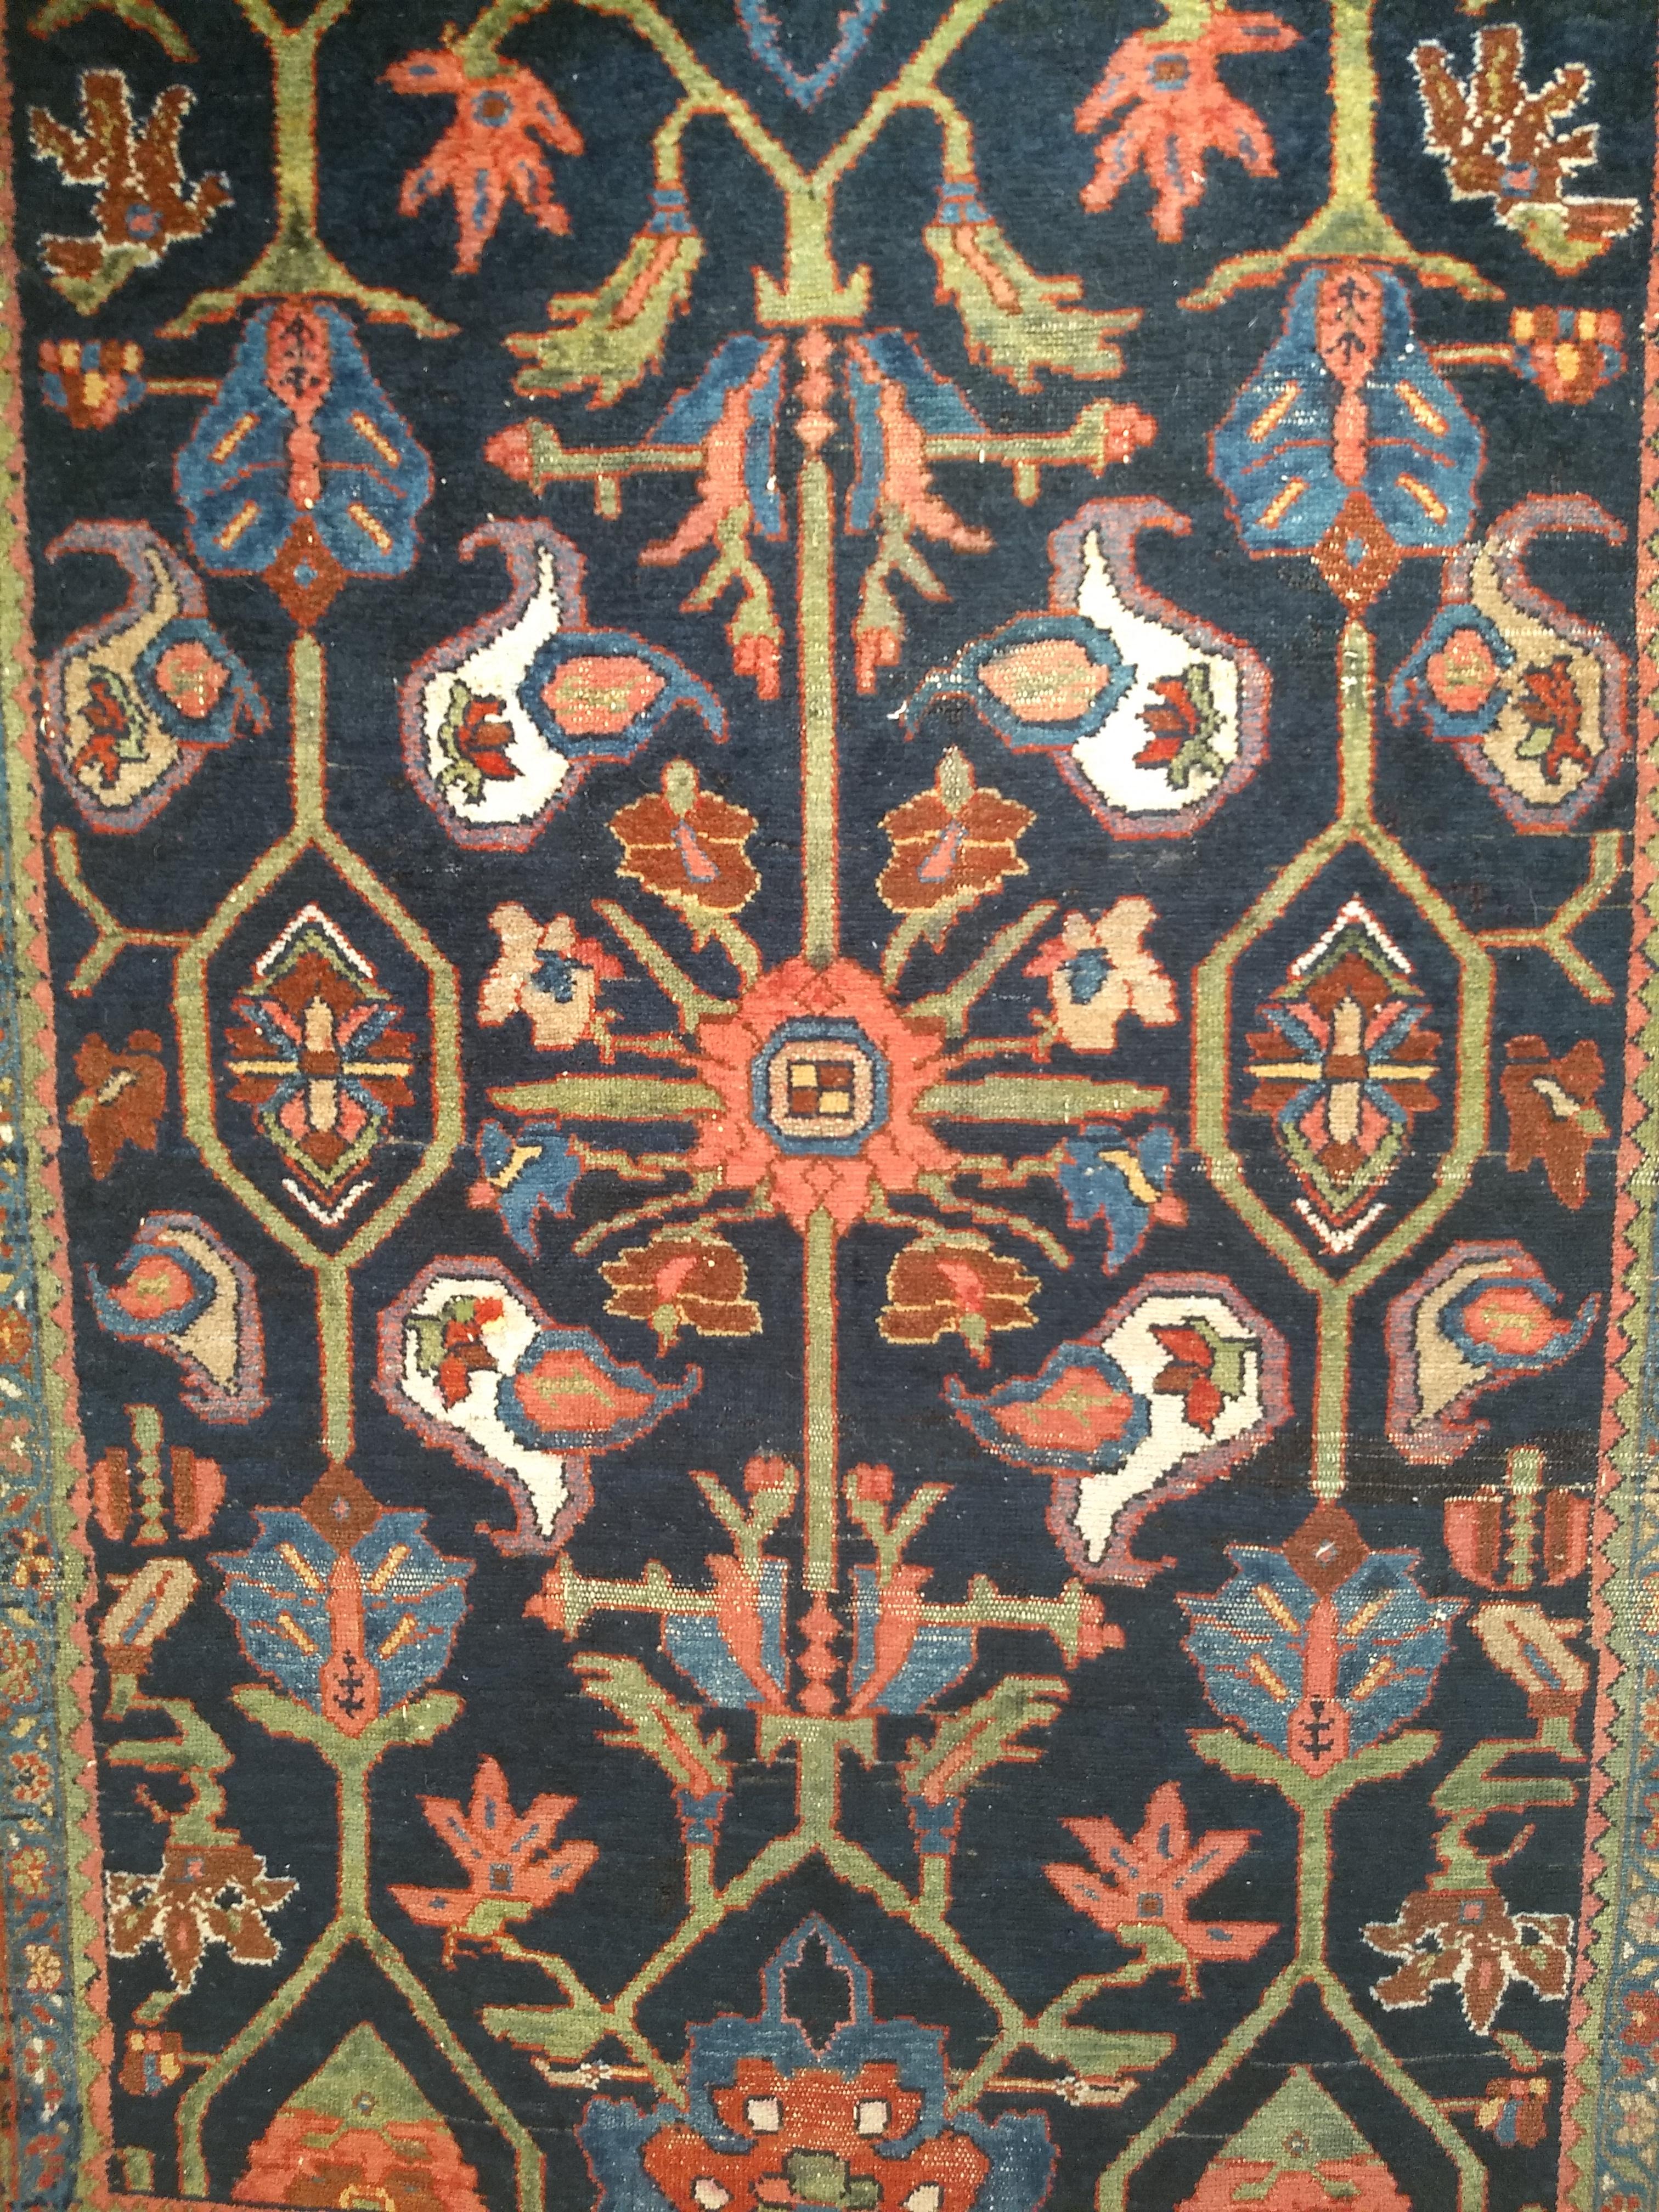 A vintage Persian Mahal Sultanabad area rug in an all over geometric pattern in navy blue, dark red, green, and French blue.   The Mahal Sultanabad area  rug has a midnight blue field color with large geometric and floral designs in French blue,